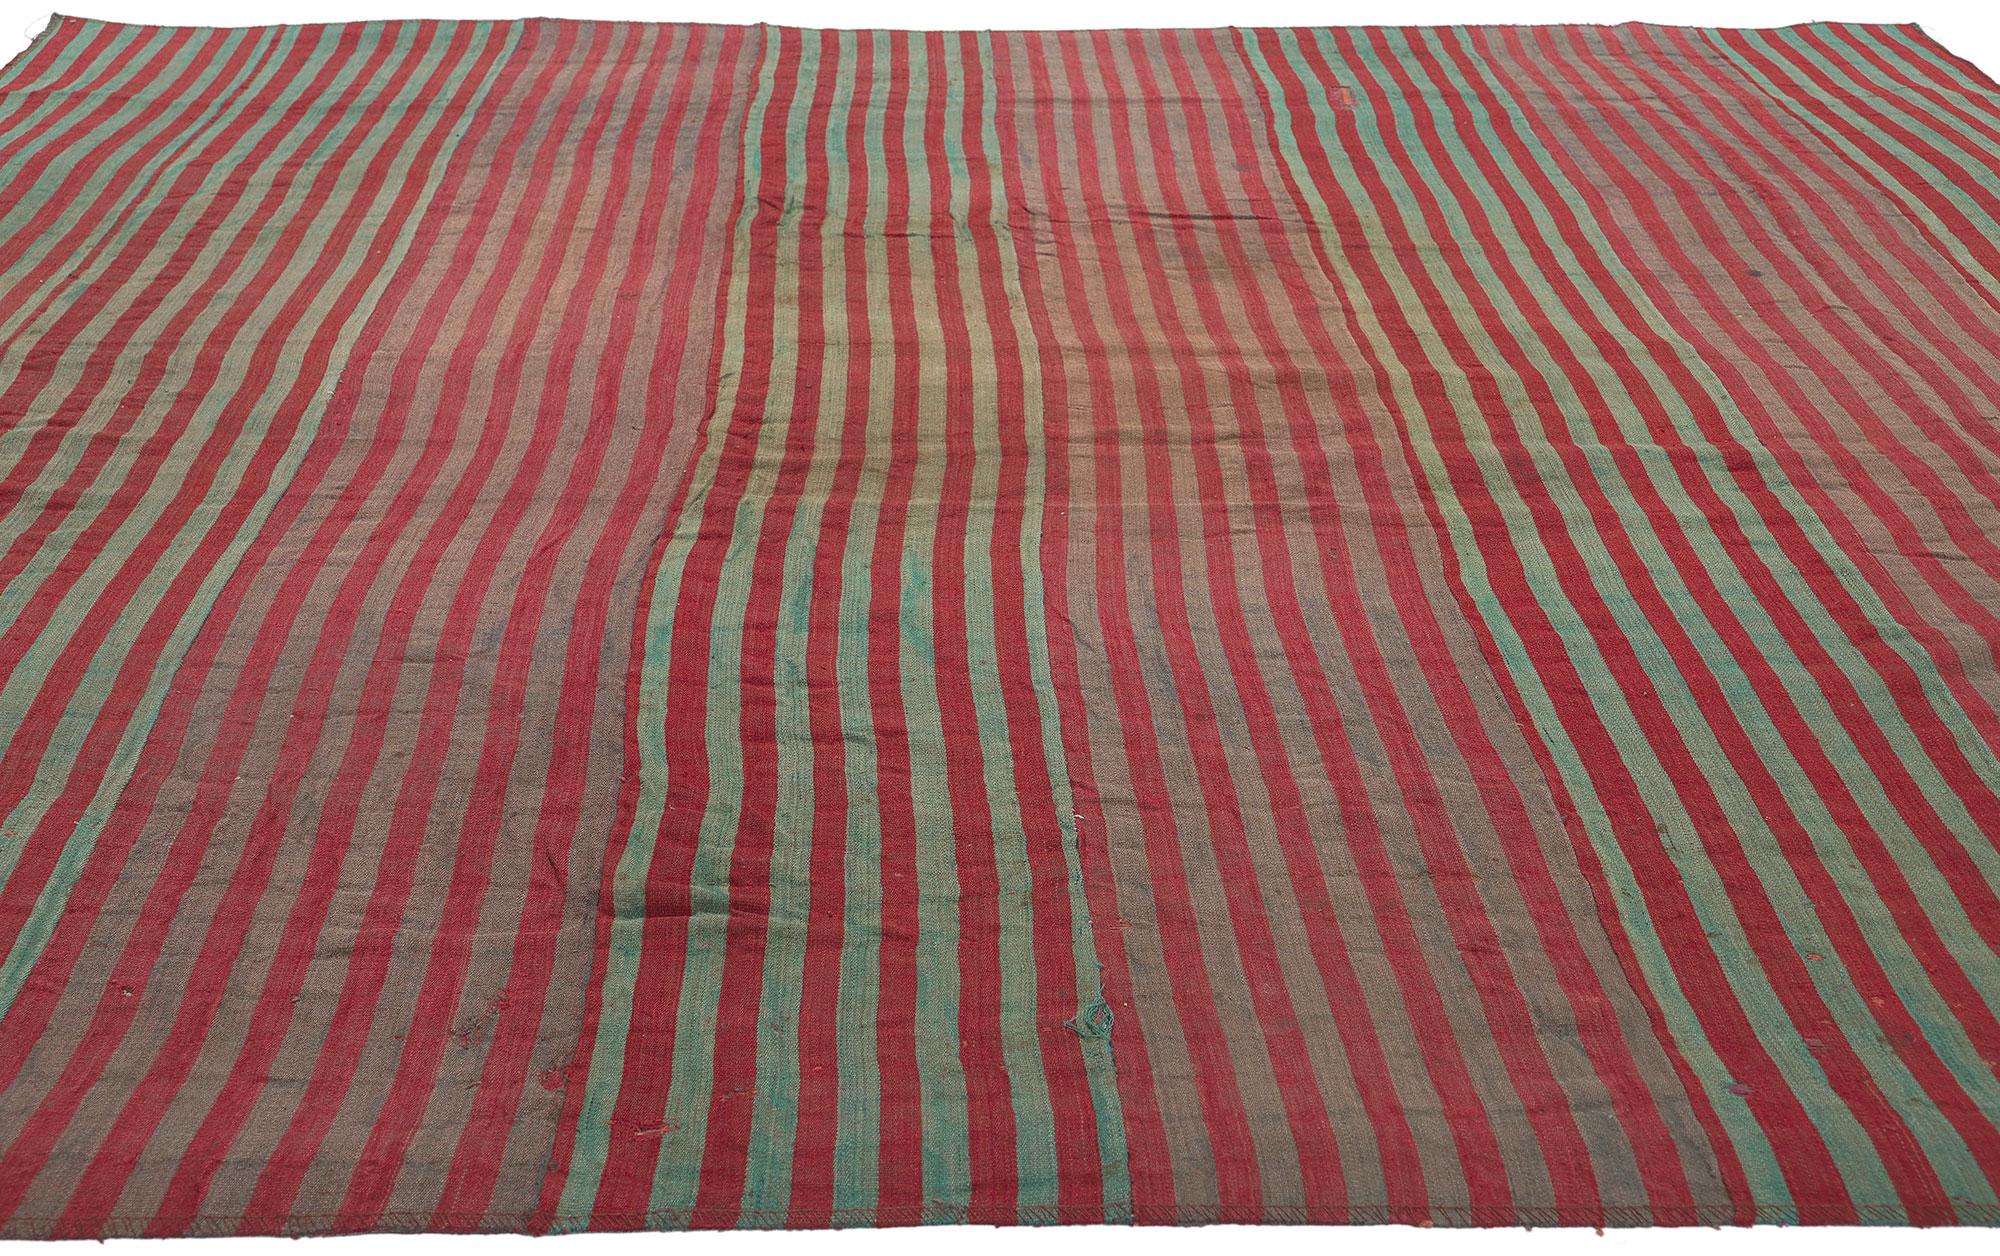 Hand-Woven Rustic Vintage Turkish Striped Kilim Rug, Weathered Charm Meets Rugged Beauty For Sale